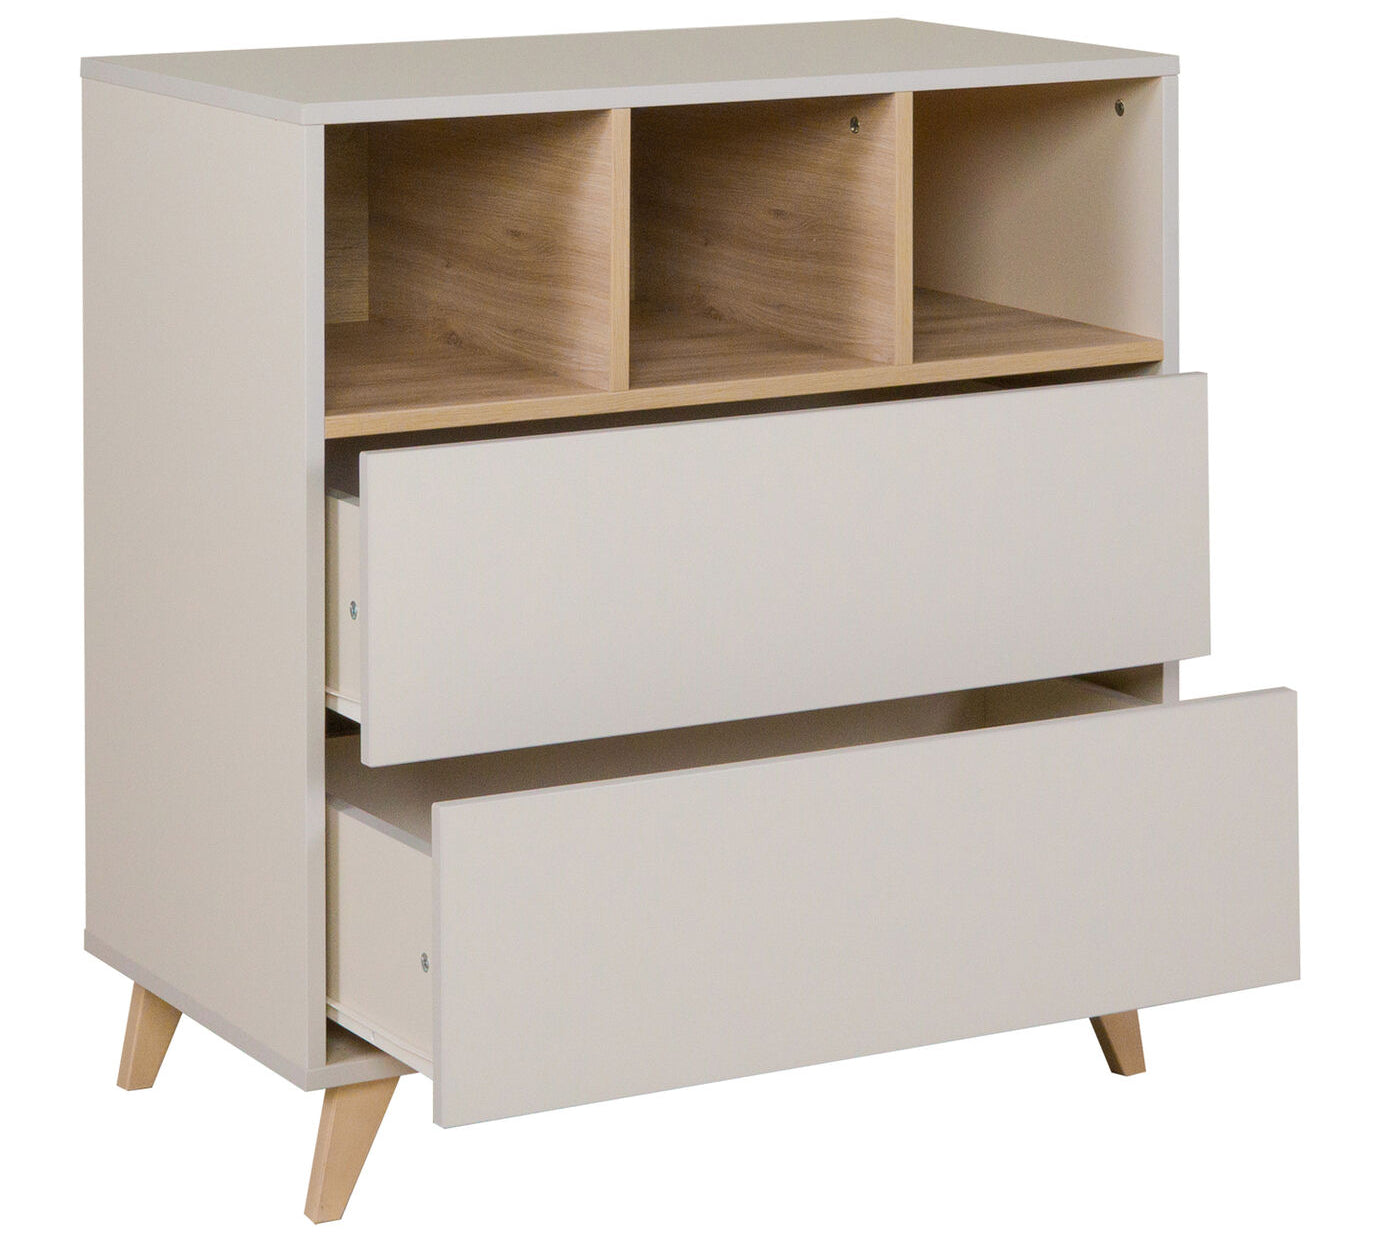 Deer Industries Furniture Store Singapore, Loft Chest Clay, Quax Singapore, Chest & Drawers Singapore